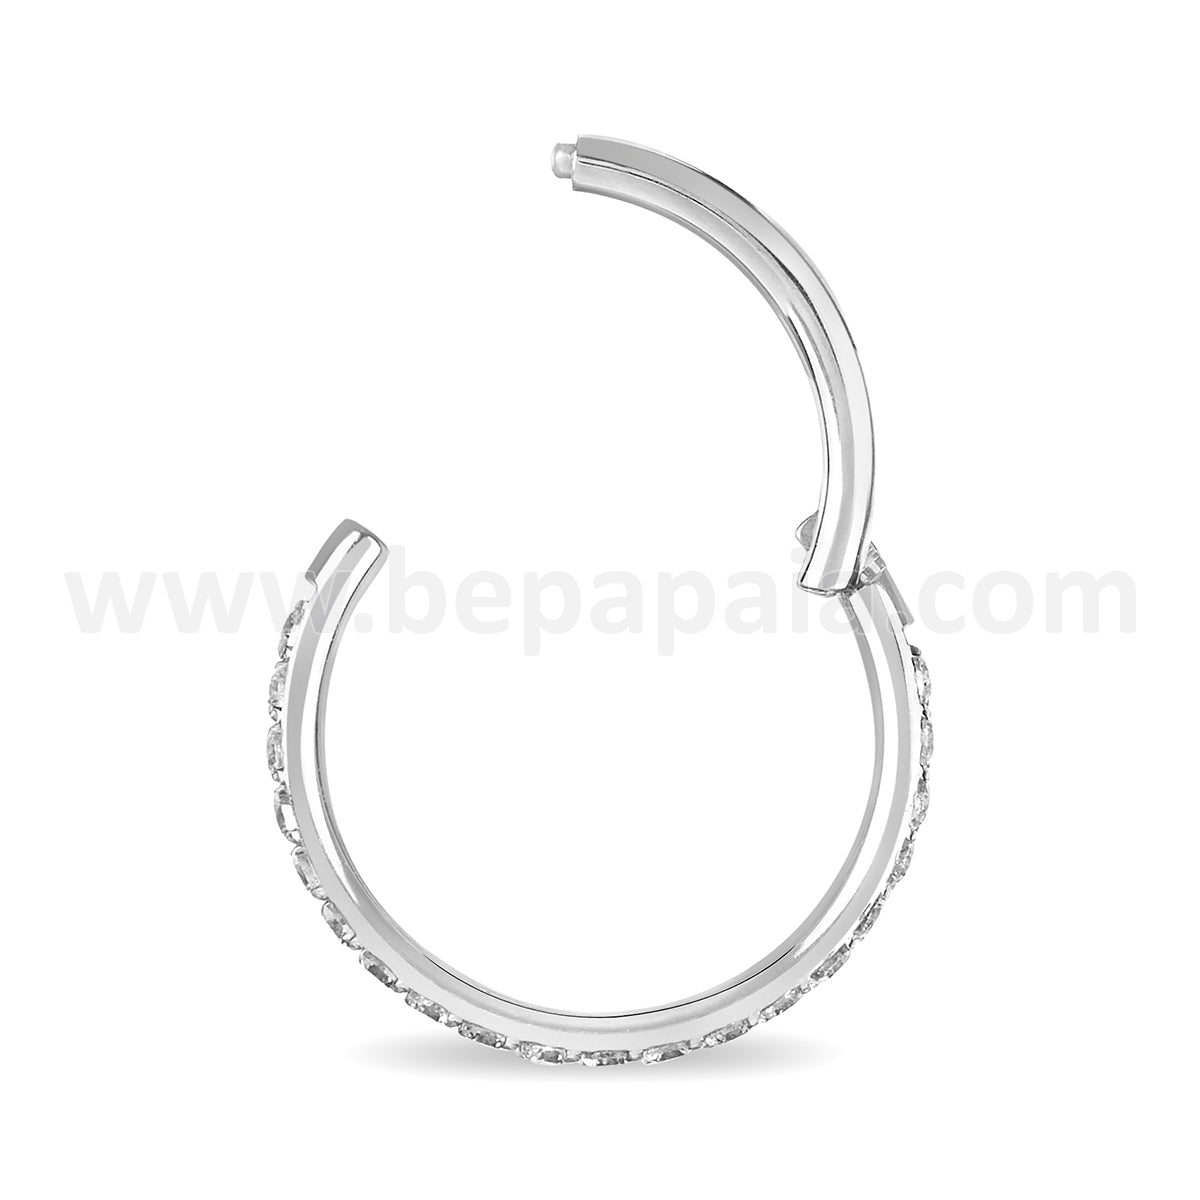 Surgical steel hinged segment ring with gems on the edge